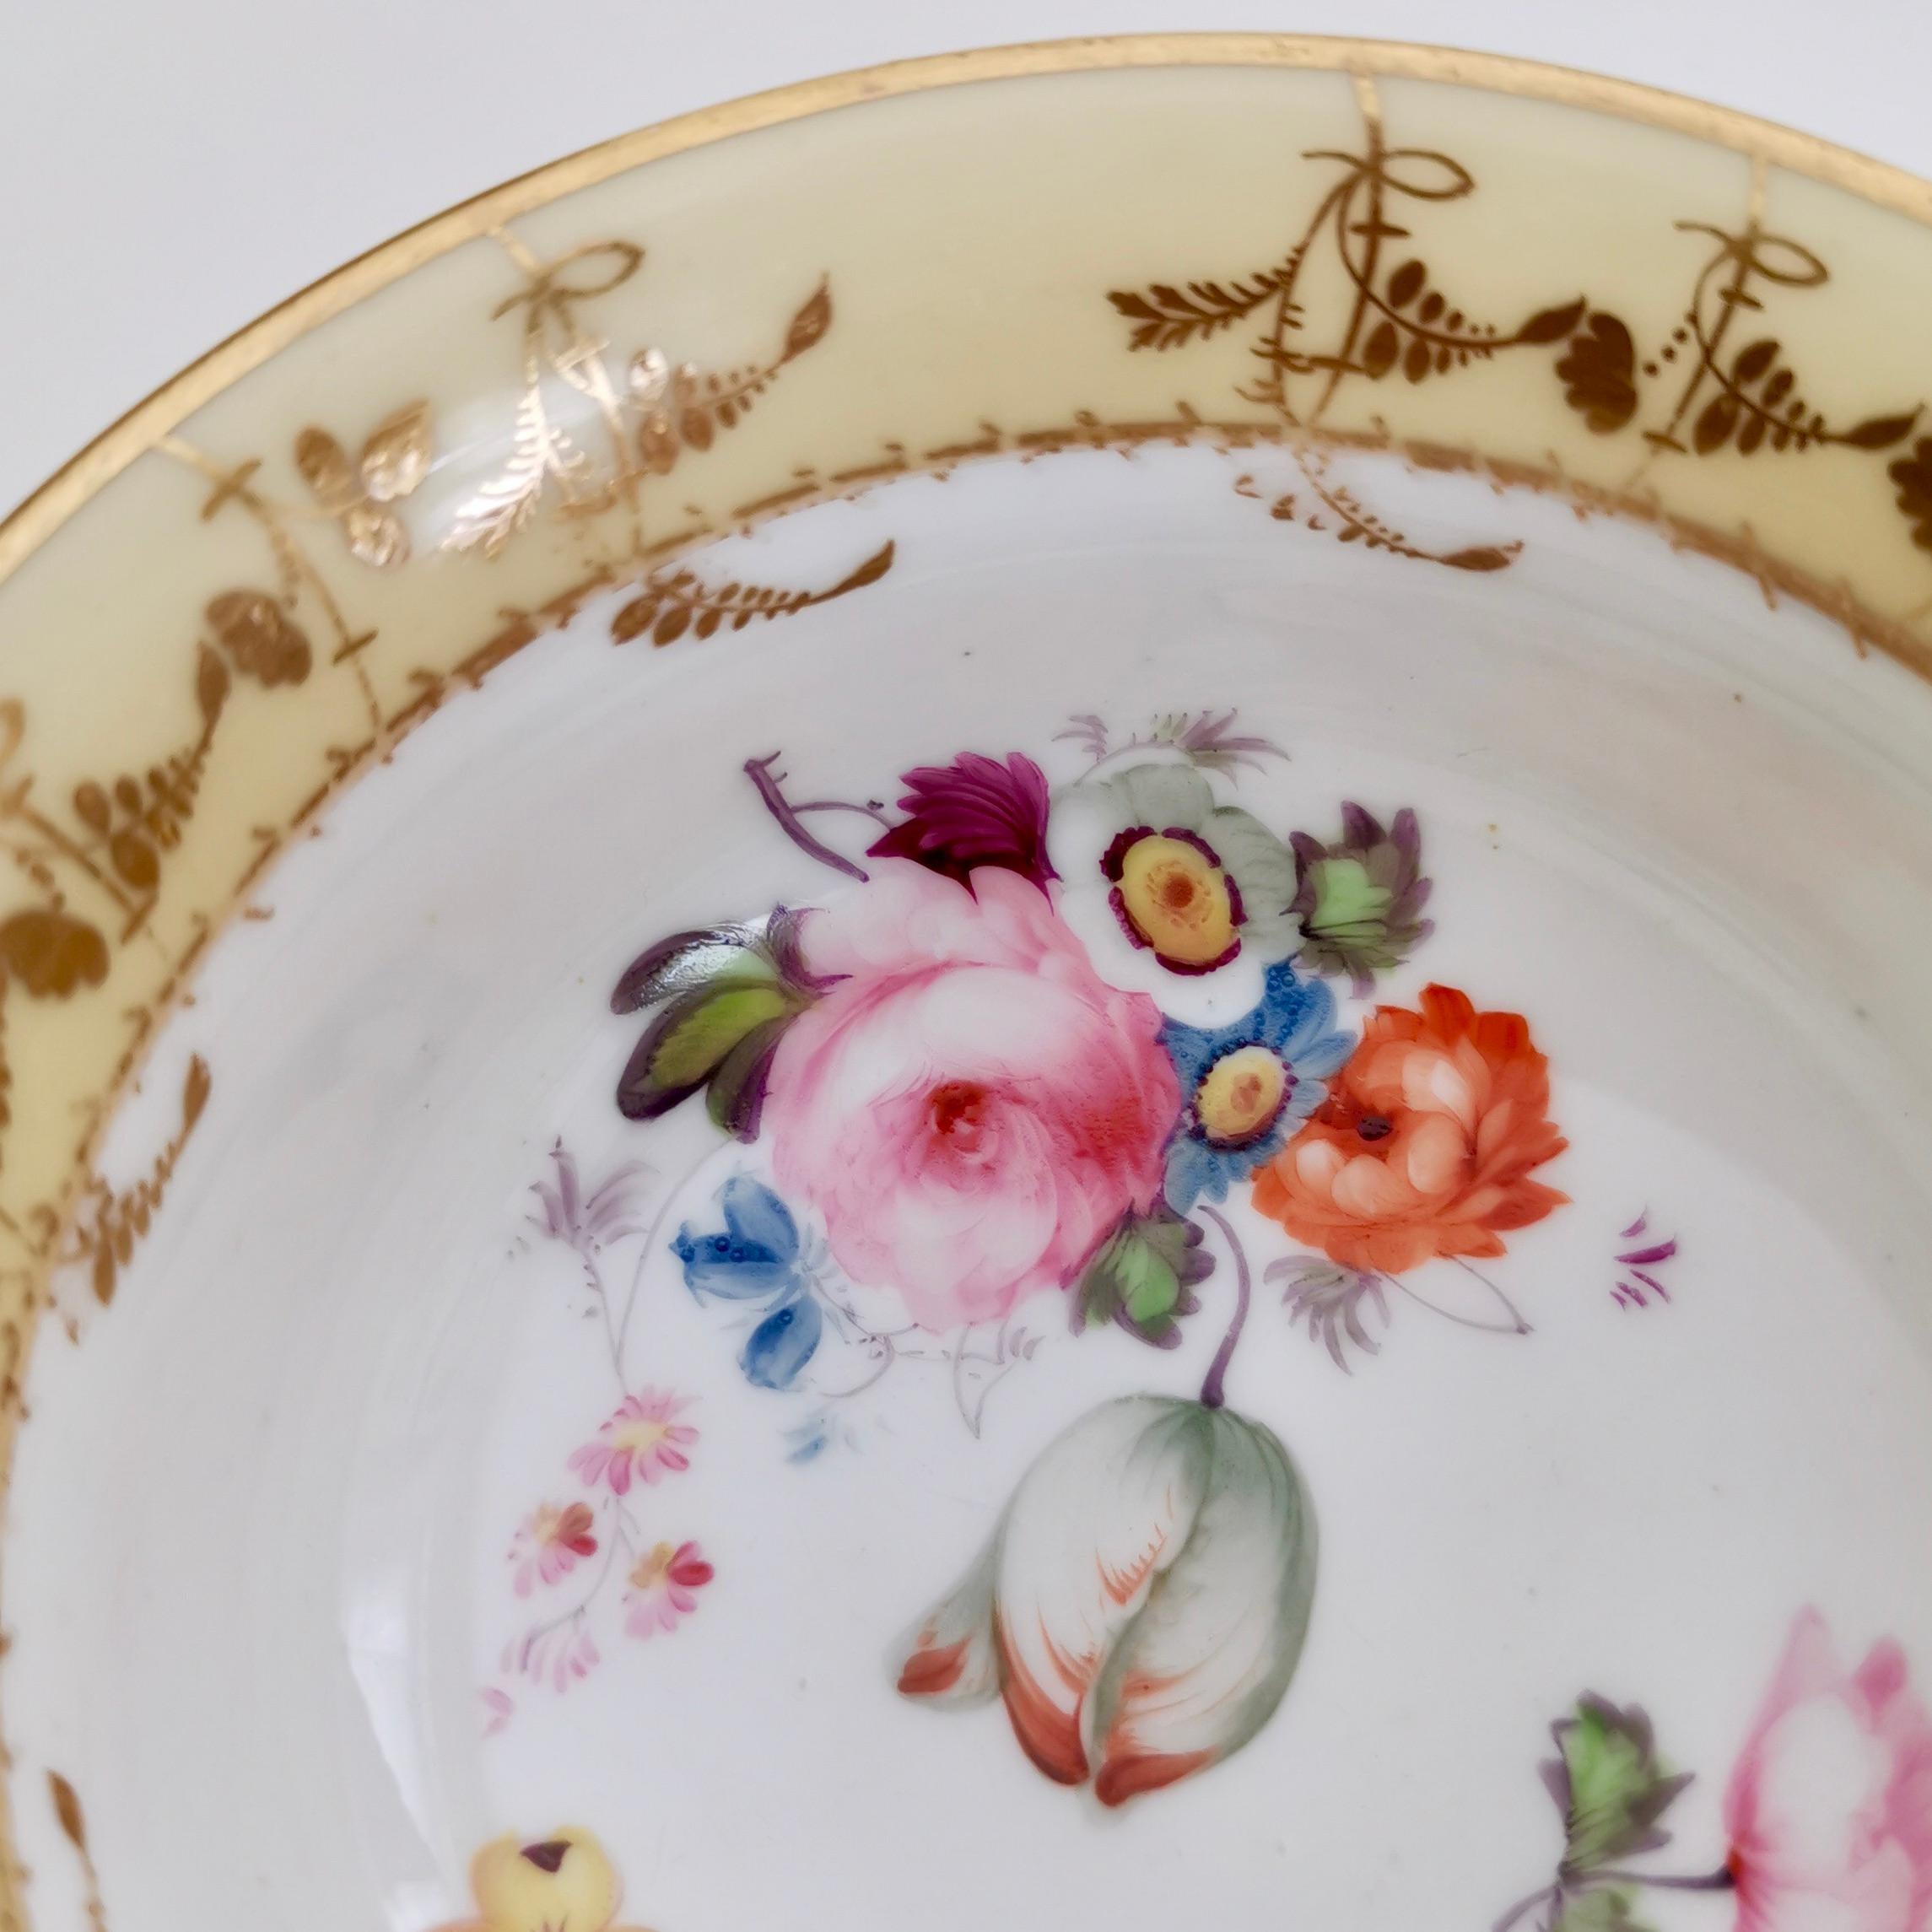 Minton Porcelain Teacup, Yellow with Hand Painted Flowers, Regency, circa 1825 2